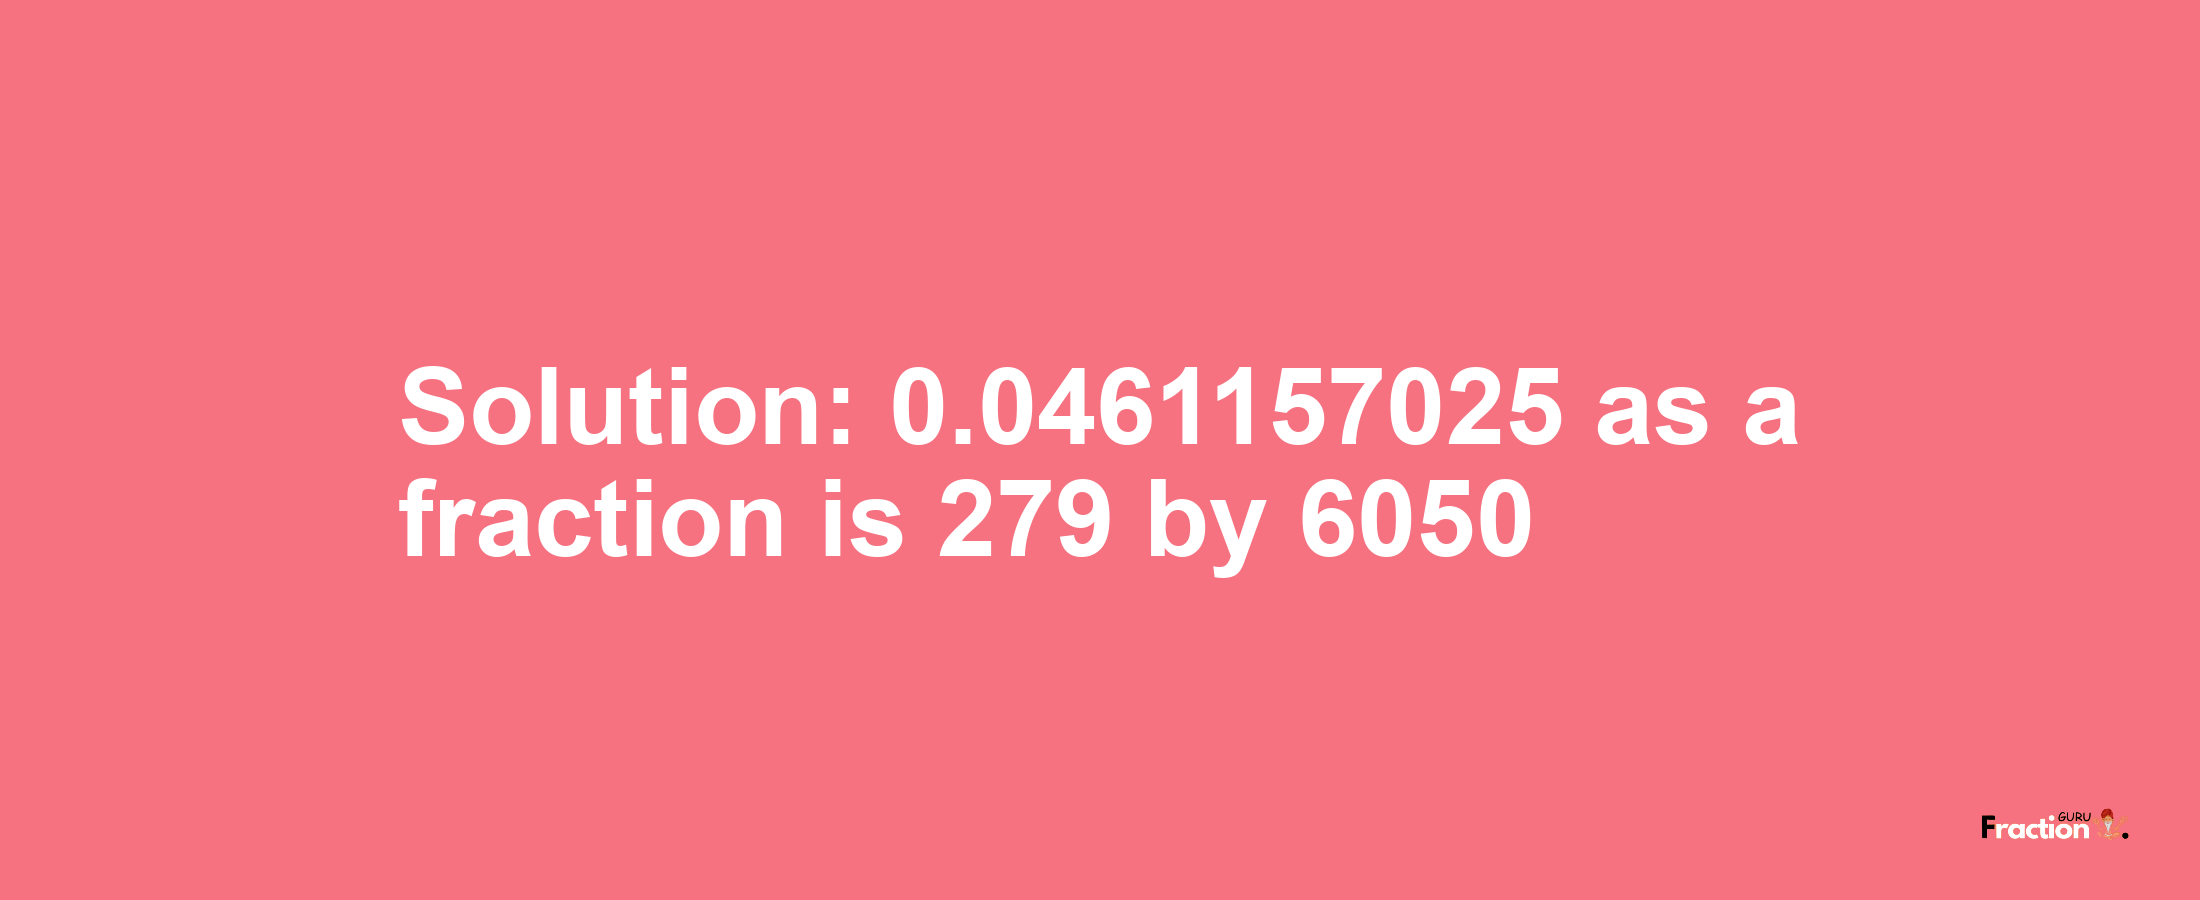 Solution:0.0461157025 as a fraction is 279/6050